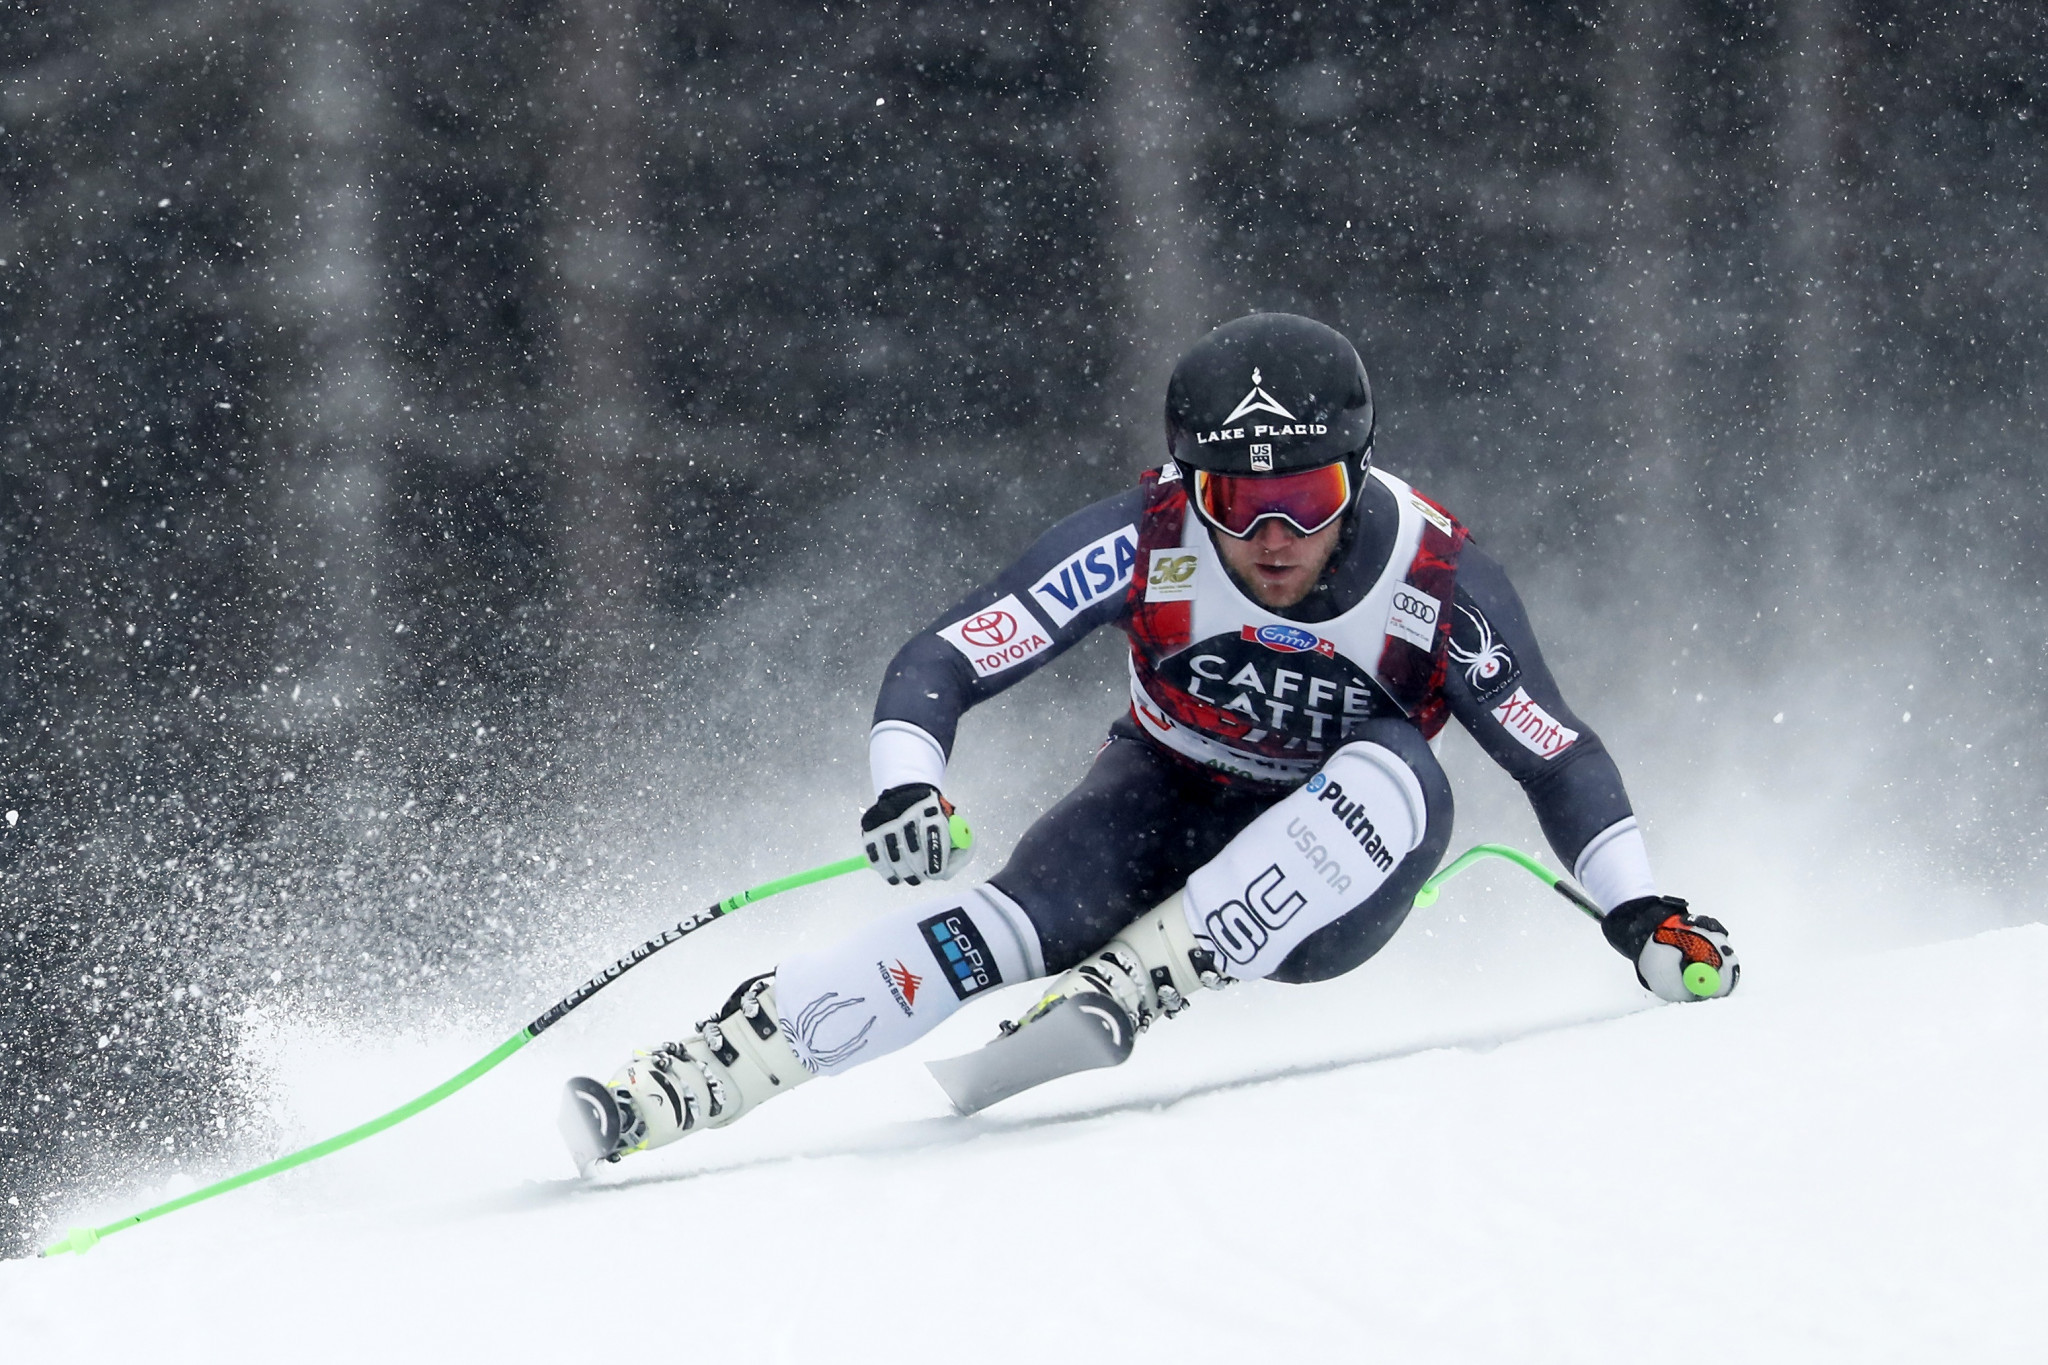 Andrew Weibrecht, who started skiing on the slopes of Whiteface Mountain in Lake Placid, won two Olympic medals in super-G ©Getty Images